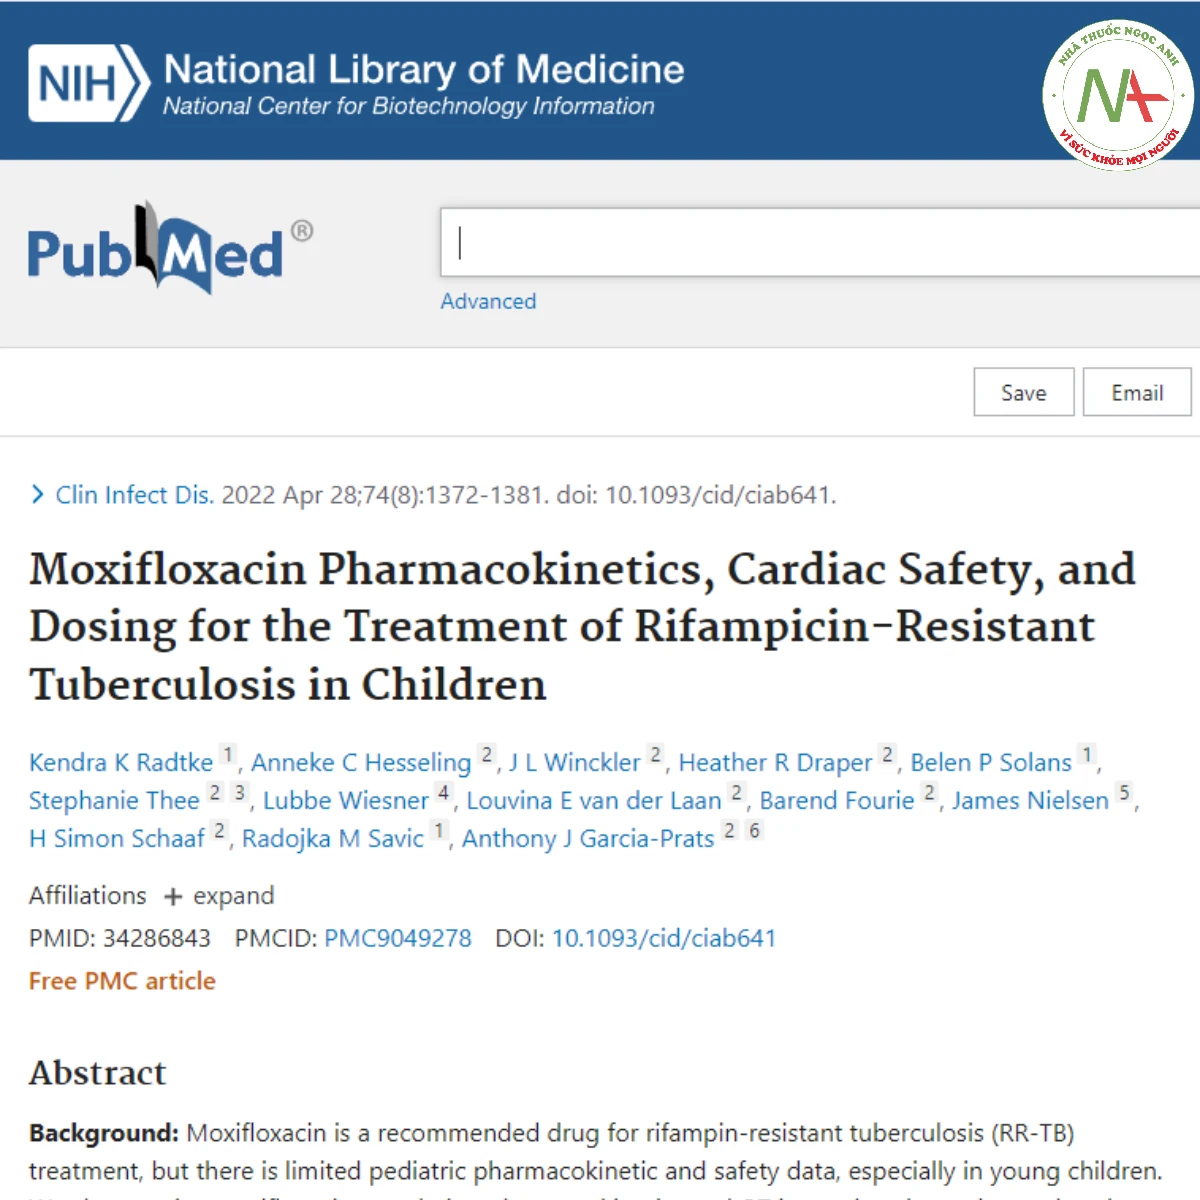 Moxifloxacin Pharmacokinetics, Cardiac Safety, and Dosing for the Treatment of Rifampicin-Resistant Tuberculosis in Children